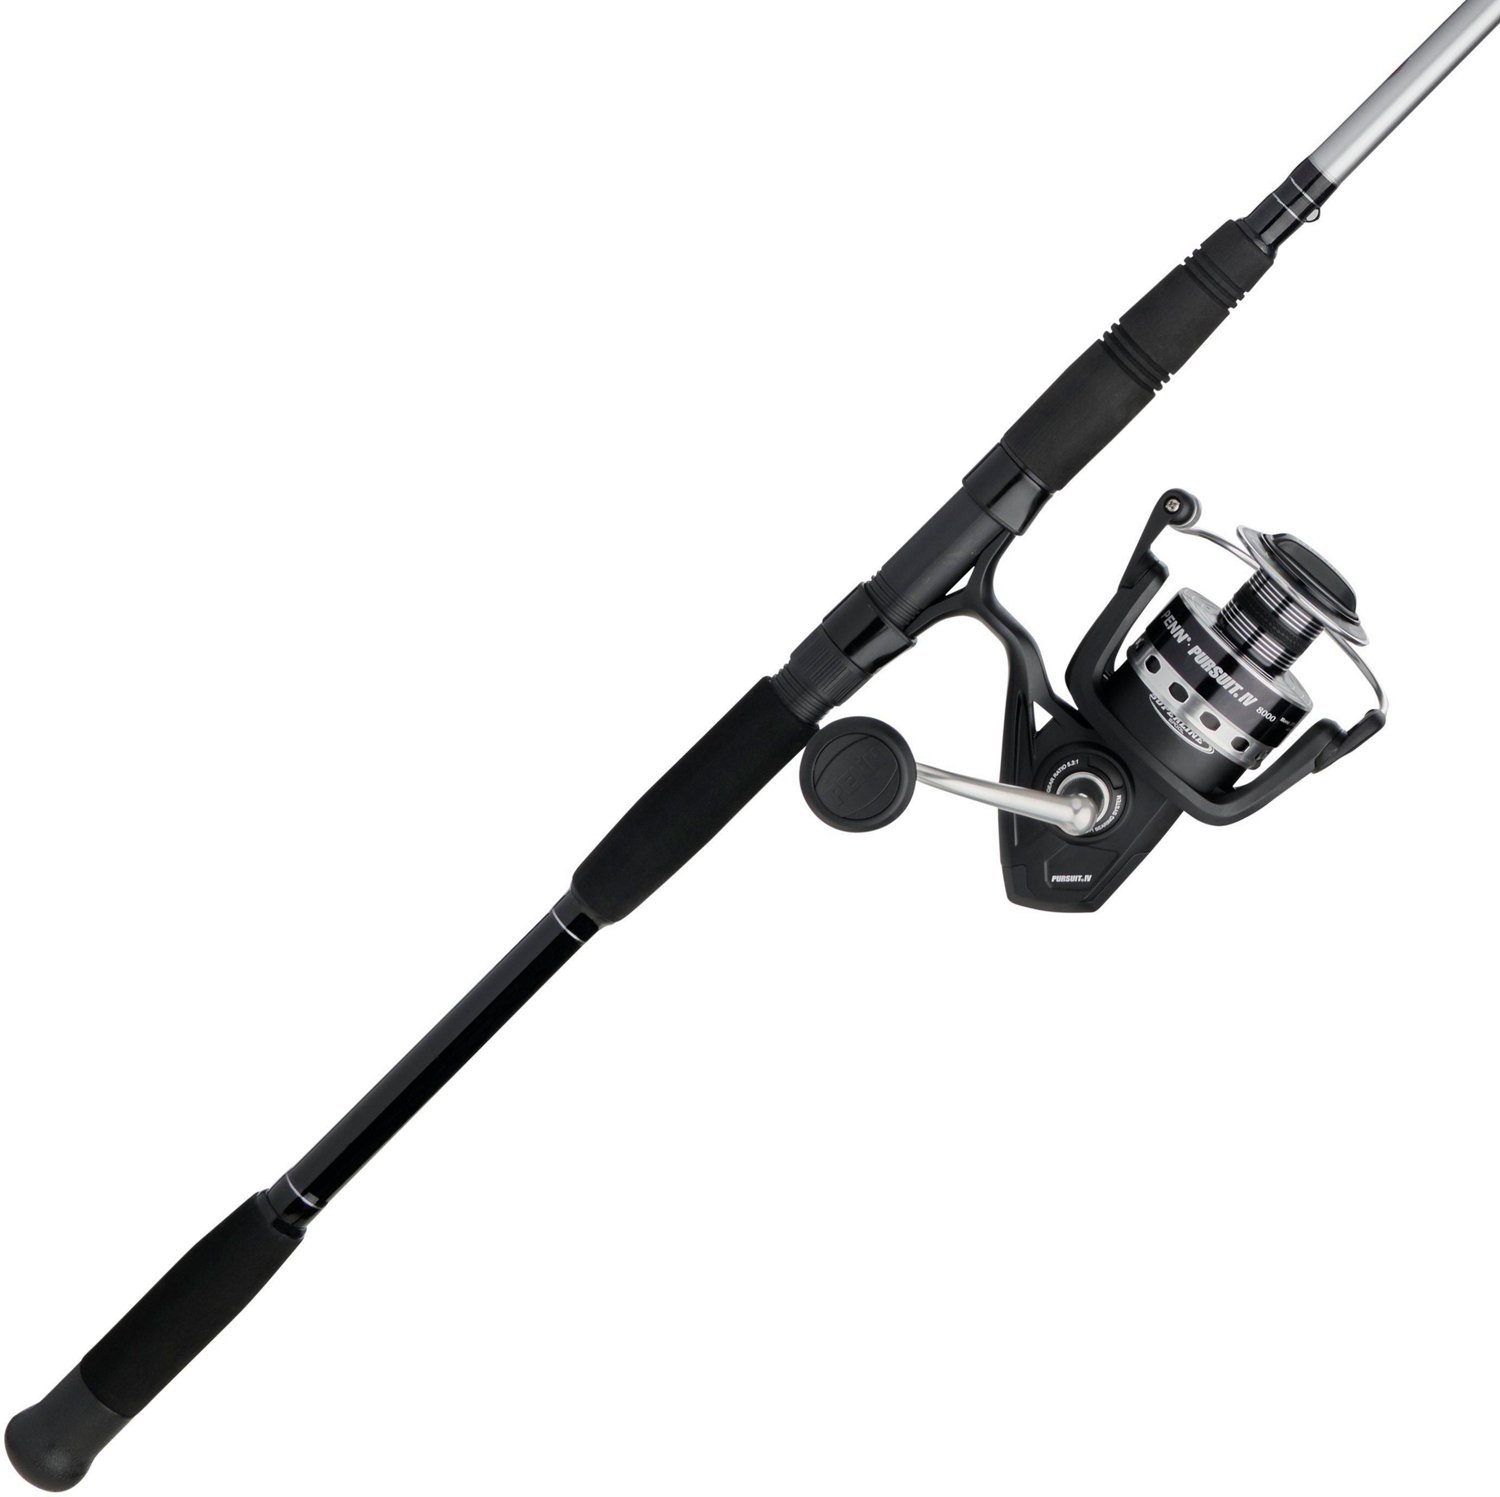 031324030923 - PENN 309M Levelwind Conventional Reel Right-handed, 300 -  Baitcast Reels at Academy Sports 309M